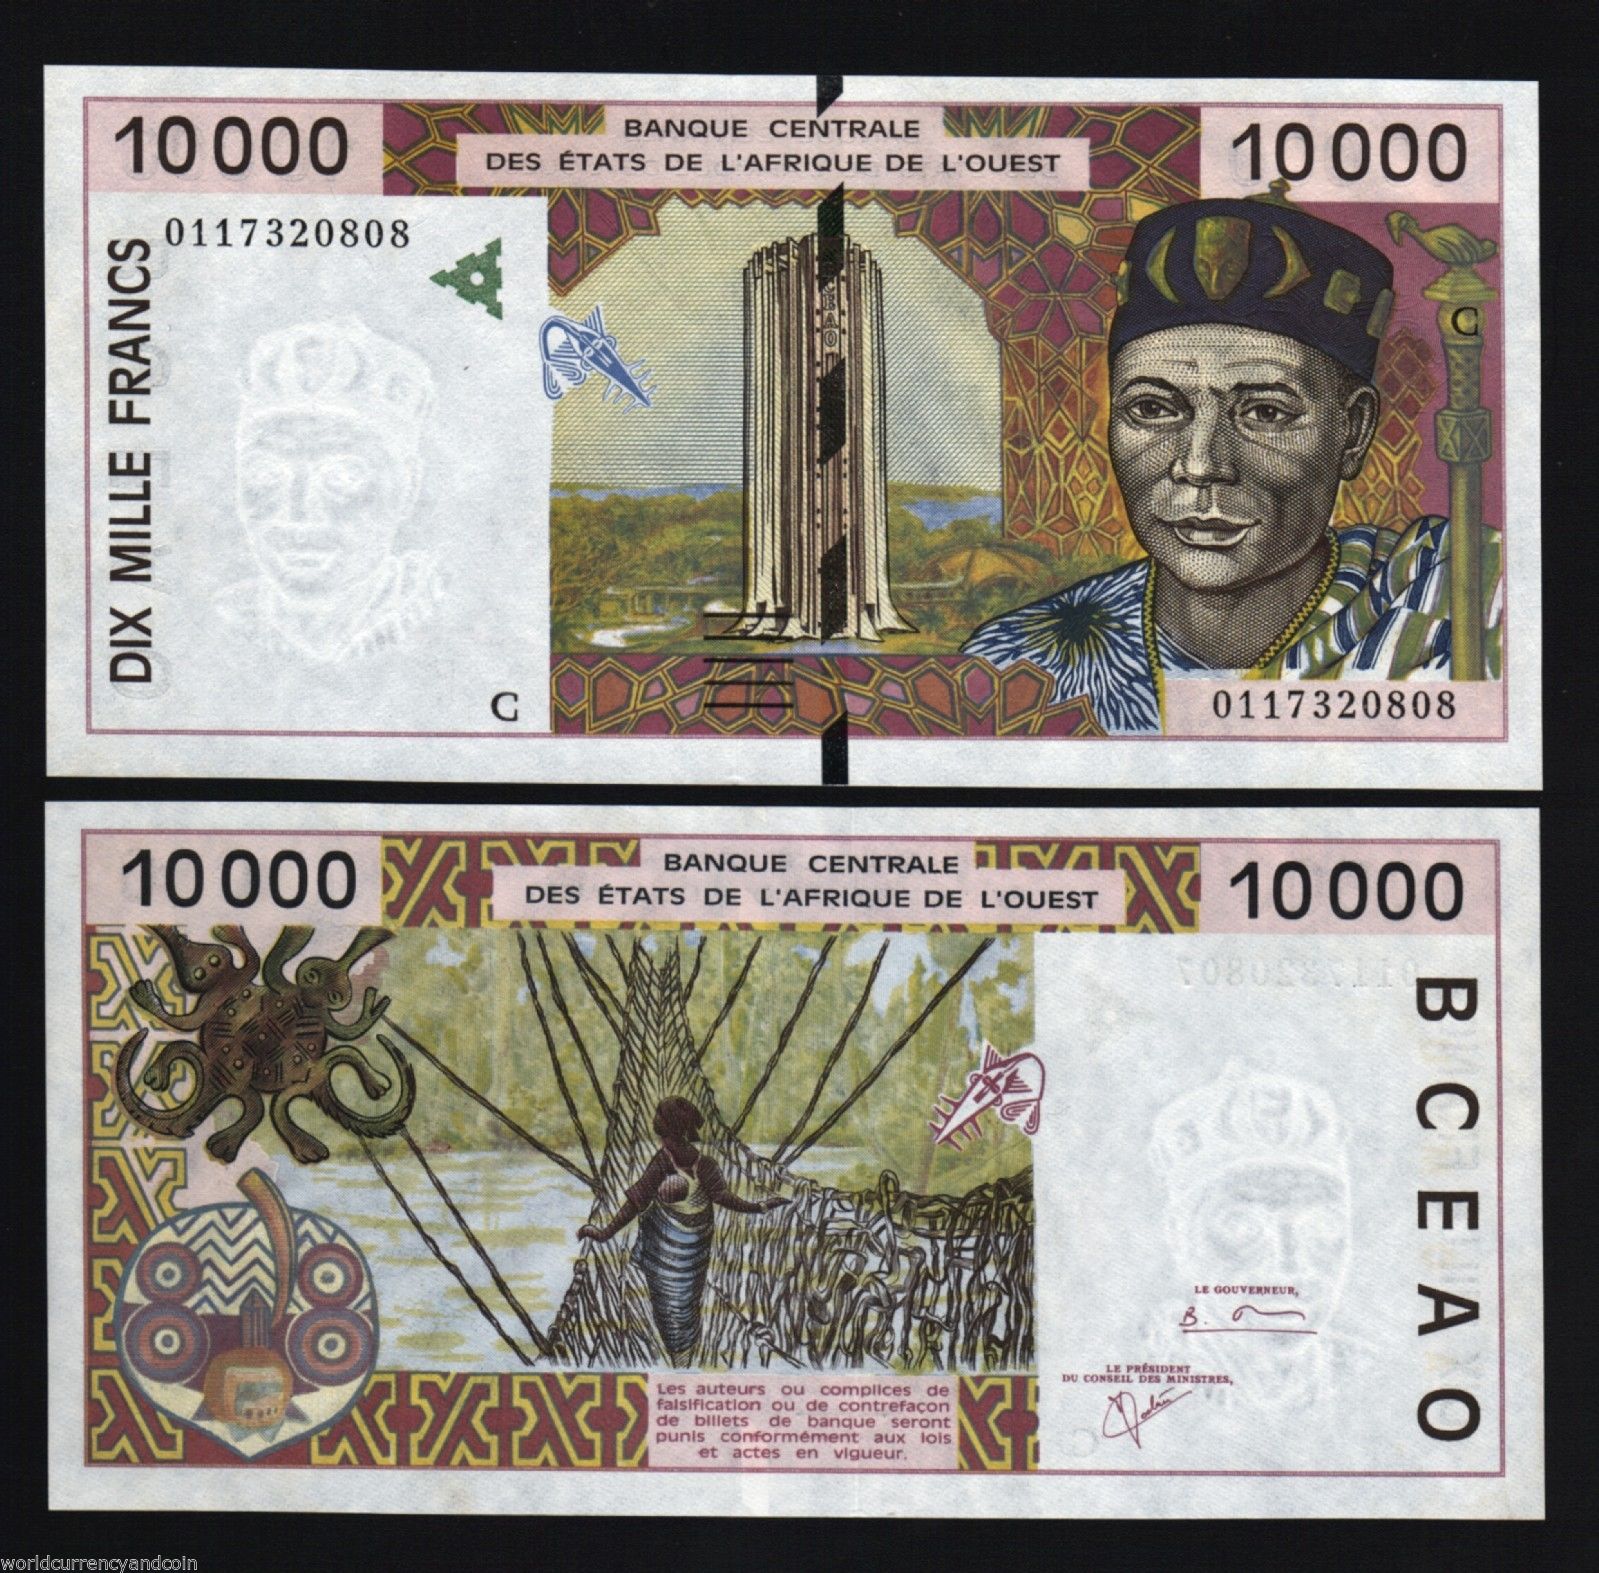 10000 francs West African States 2002